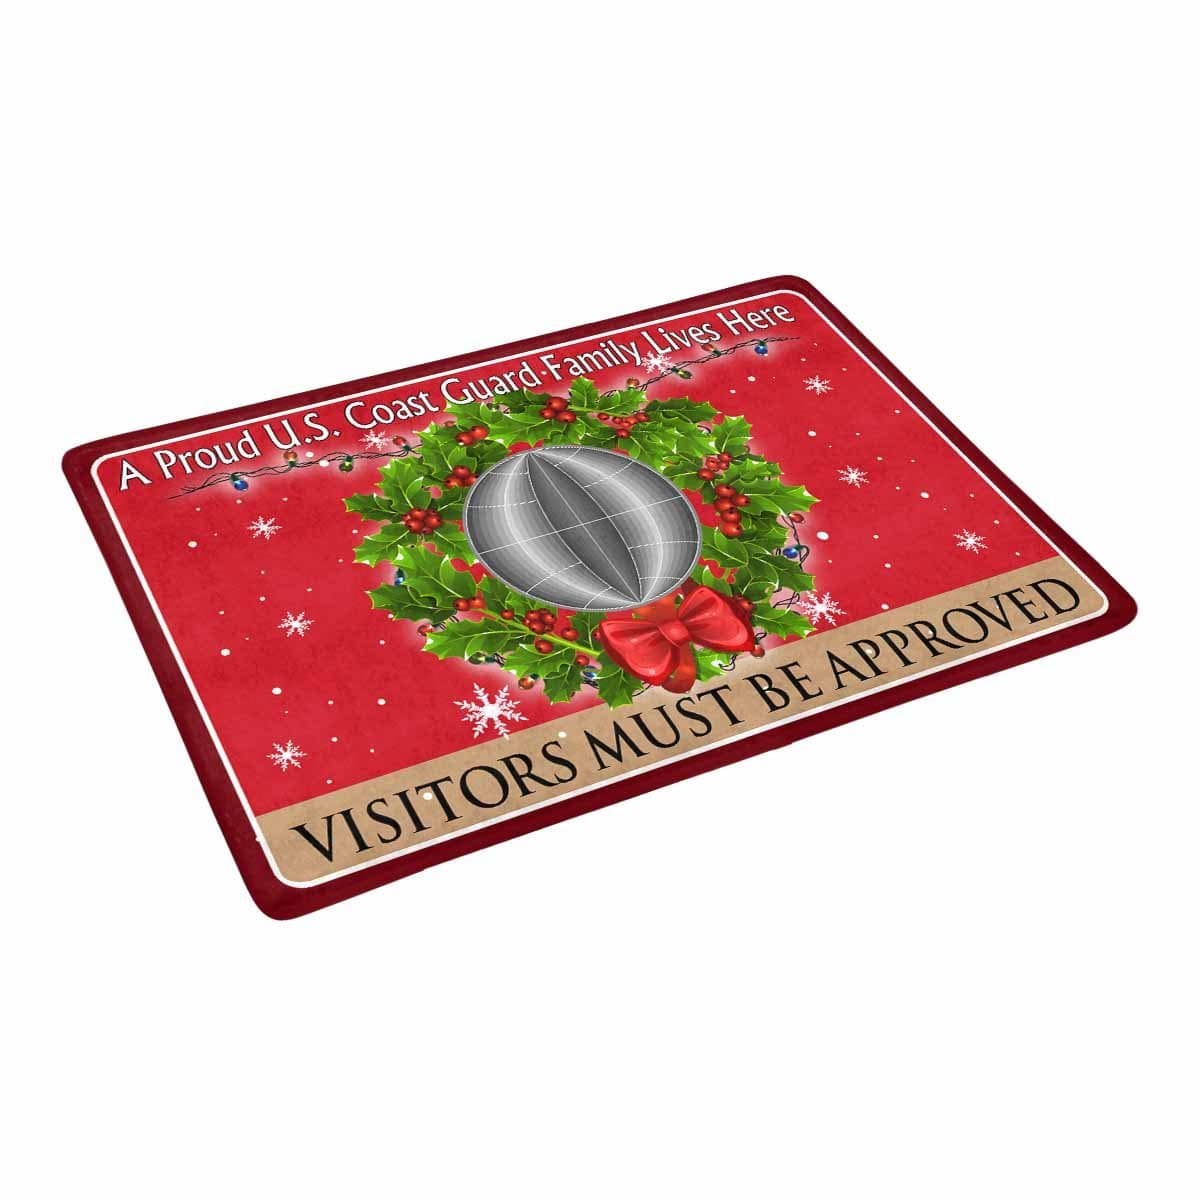 US Coast Guard Electrician's Mate EM Logo - Visitors must be approved Christmas Doormat-Doormat-USCG-Rate-Veterans Nation